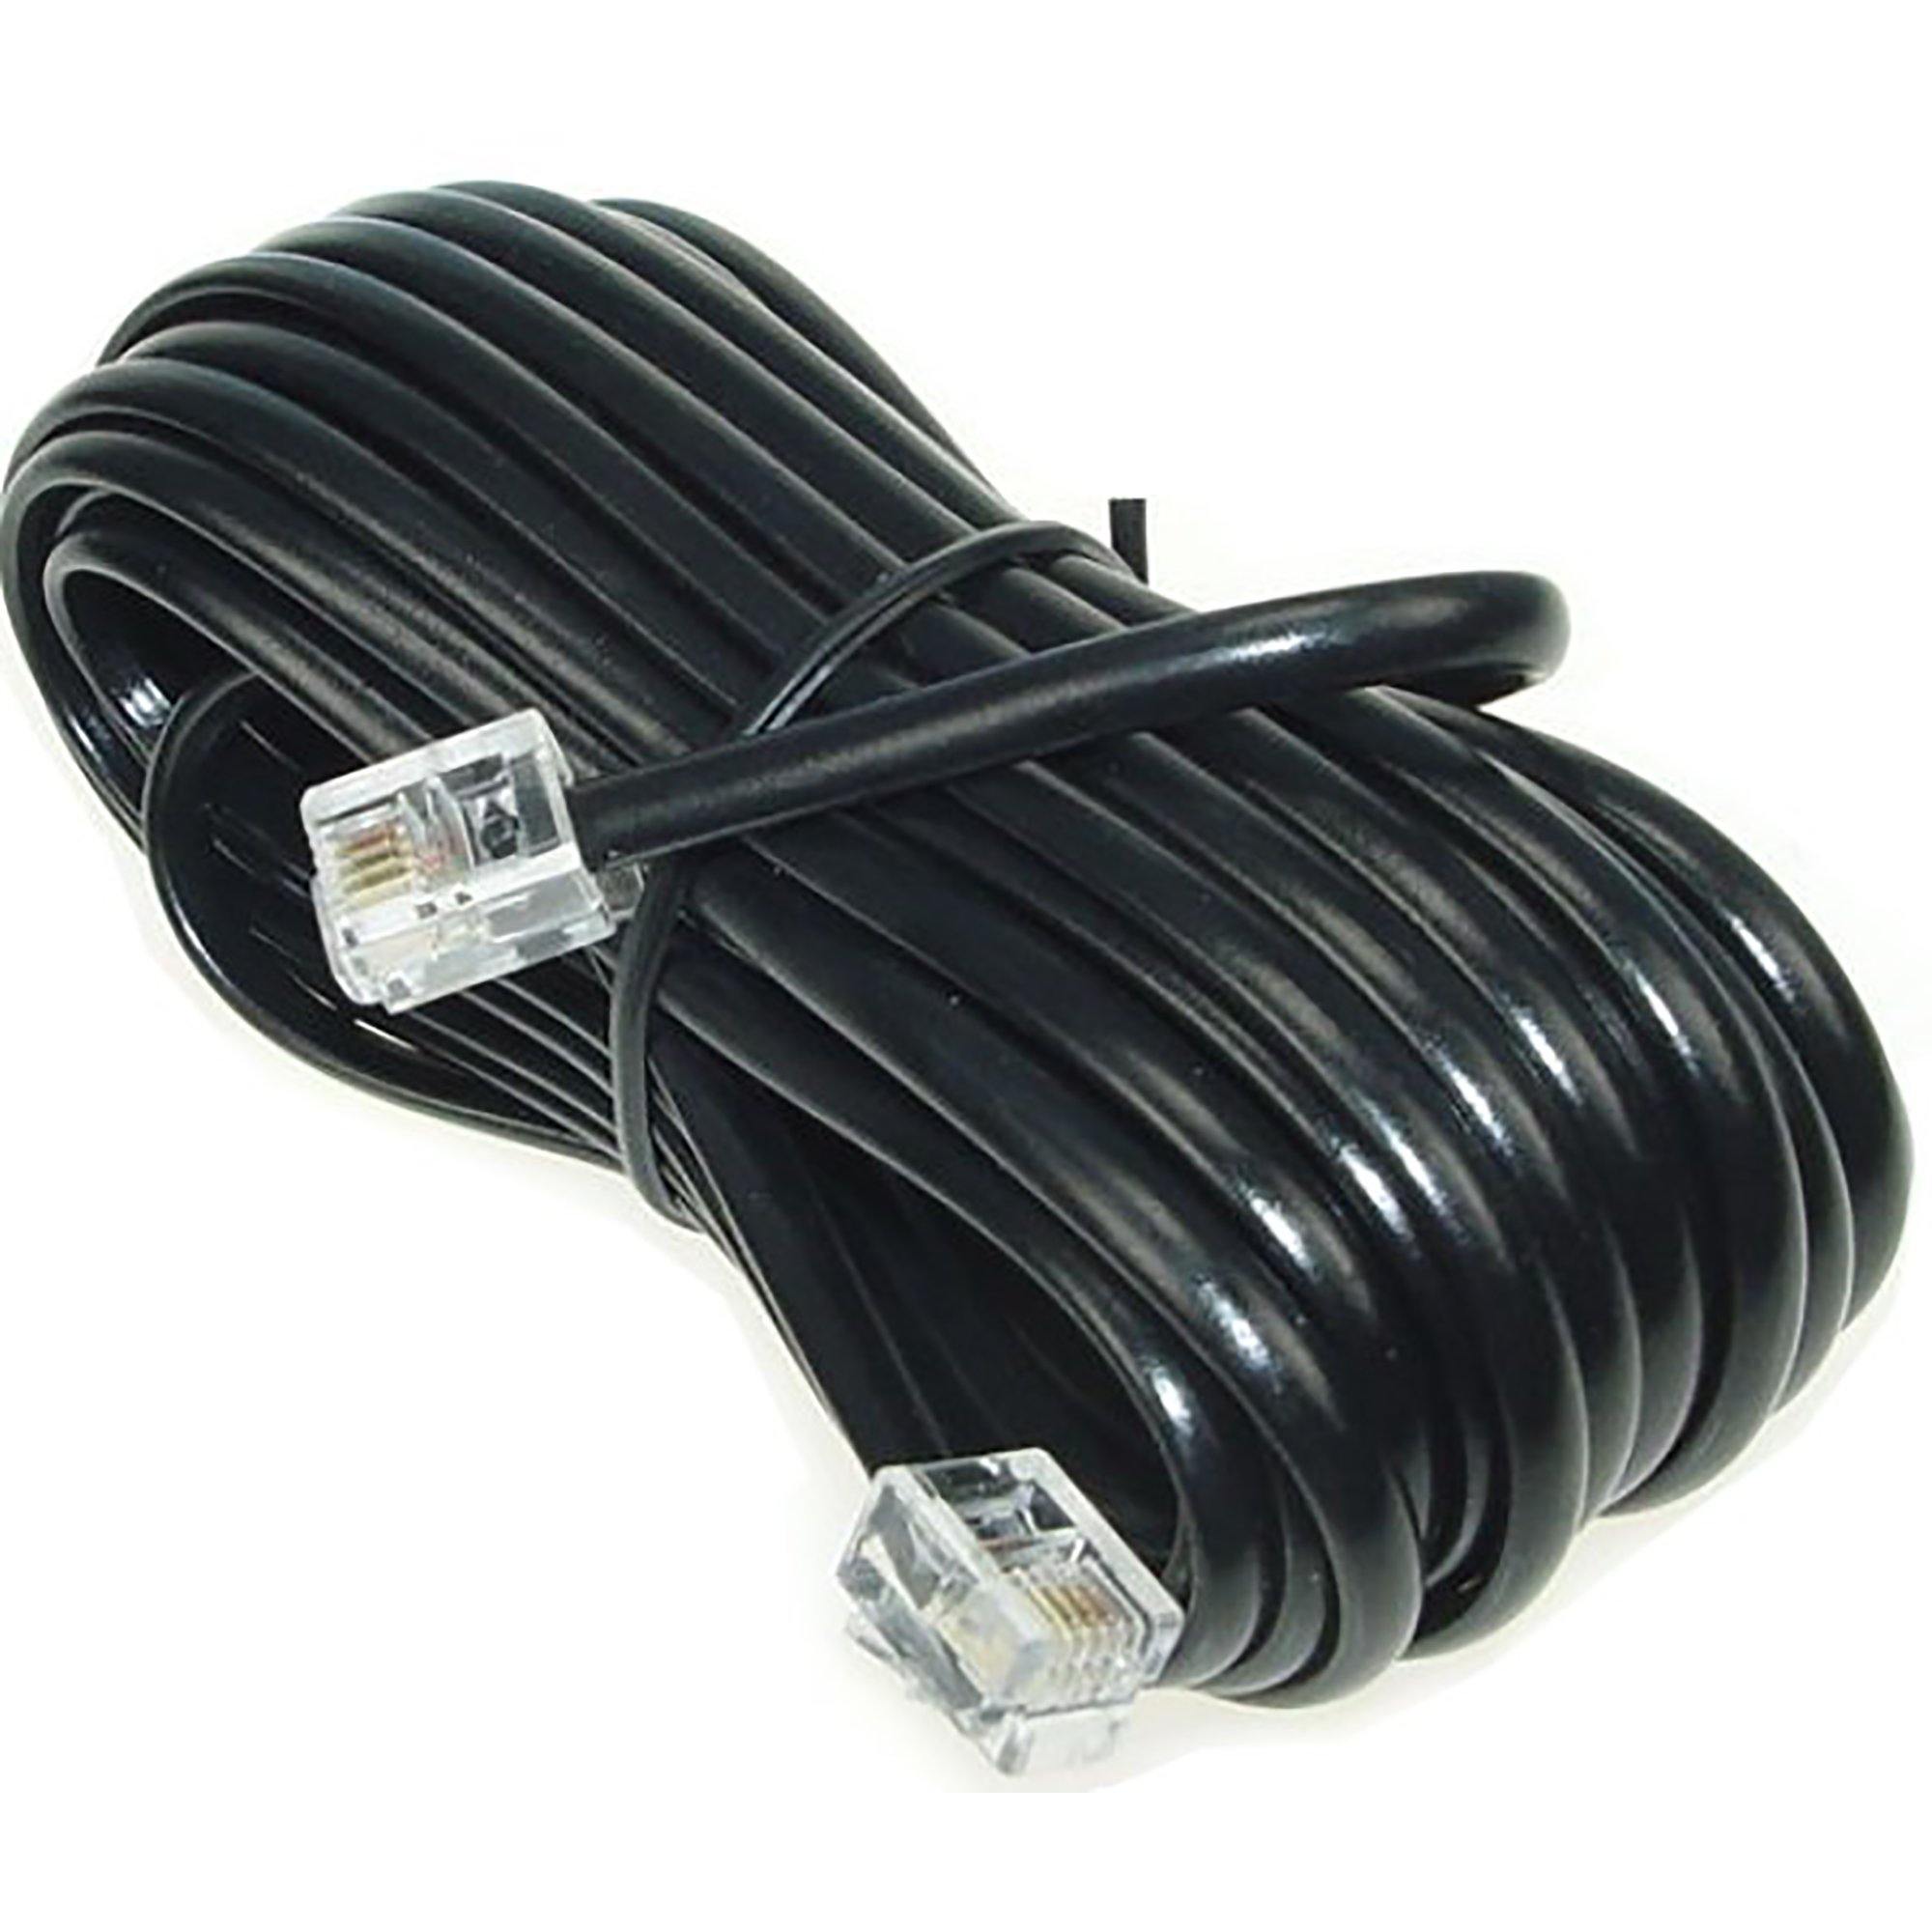 Cable Line 25Ft Black - Dollar Max Depot